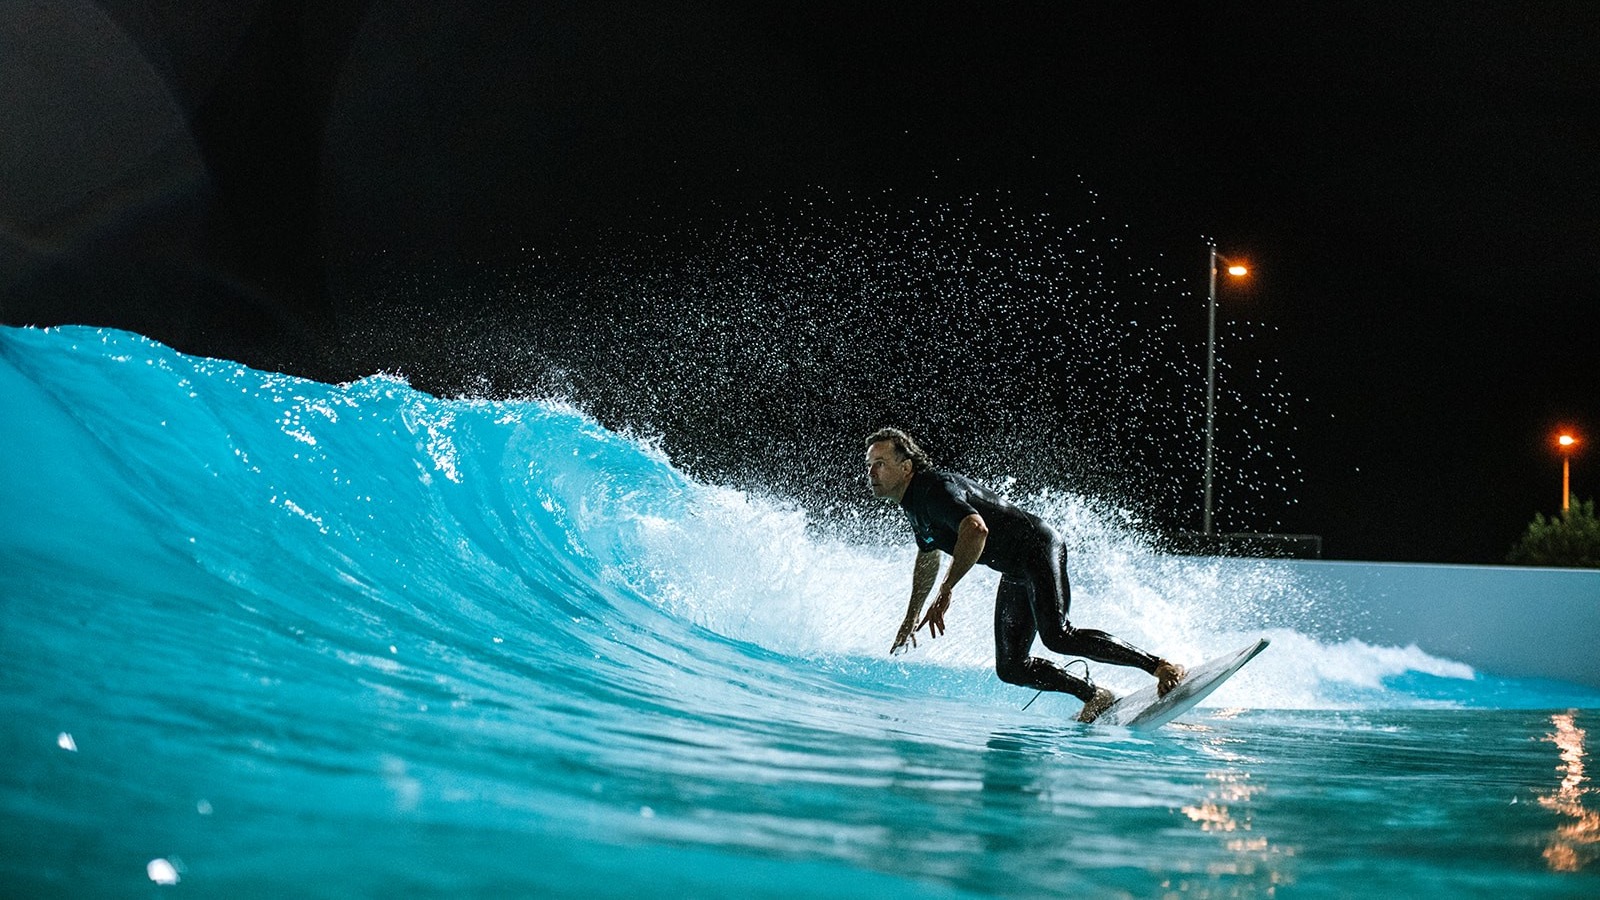 night surfing in a wave pool